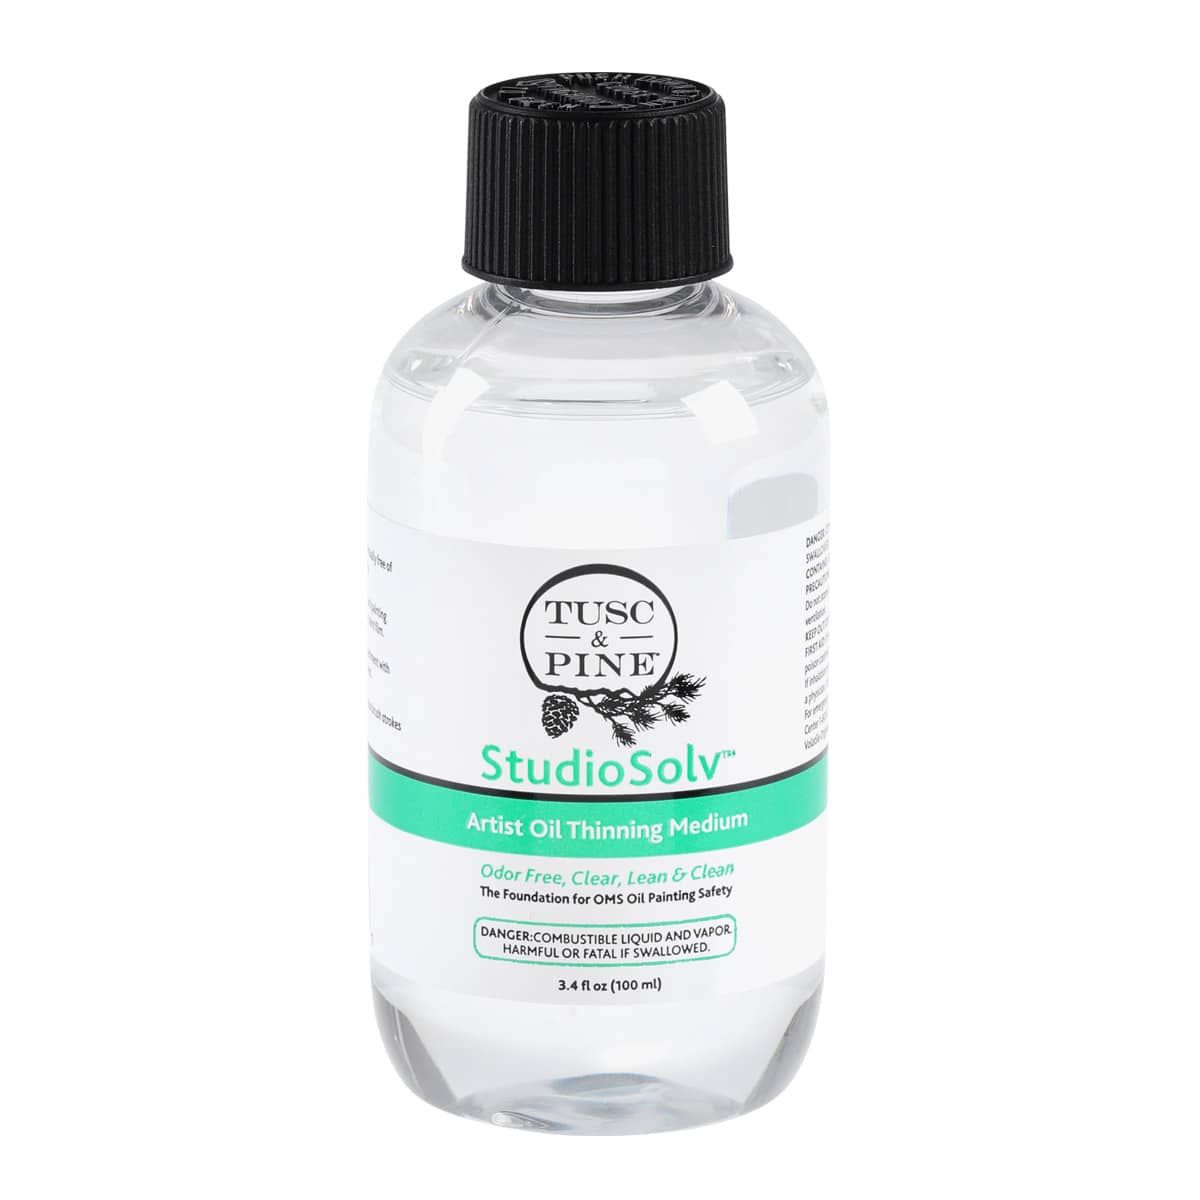 StudioSolv™ Artist Oil Thinning Medium (16.9oz) with Silicoil Brush Cleaner  Tank and 120 Count Soho Wipes Set